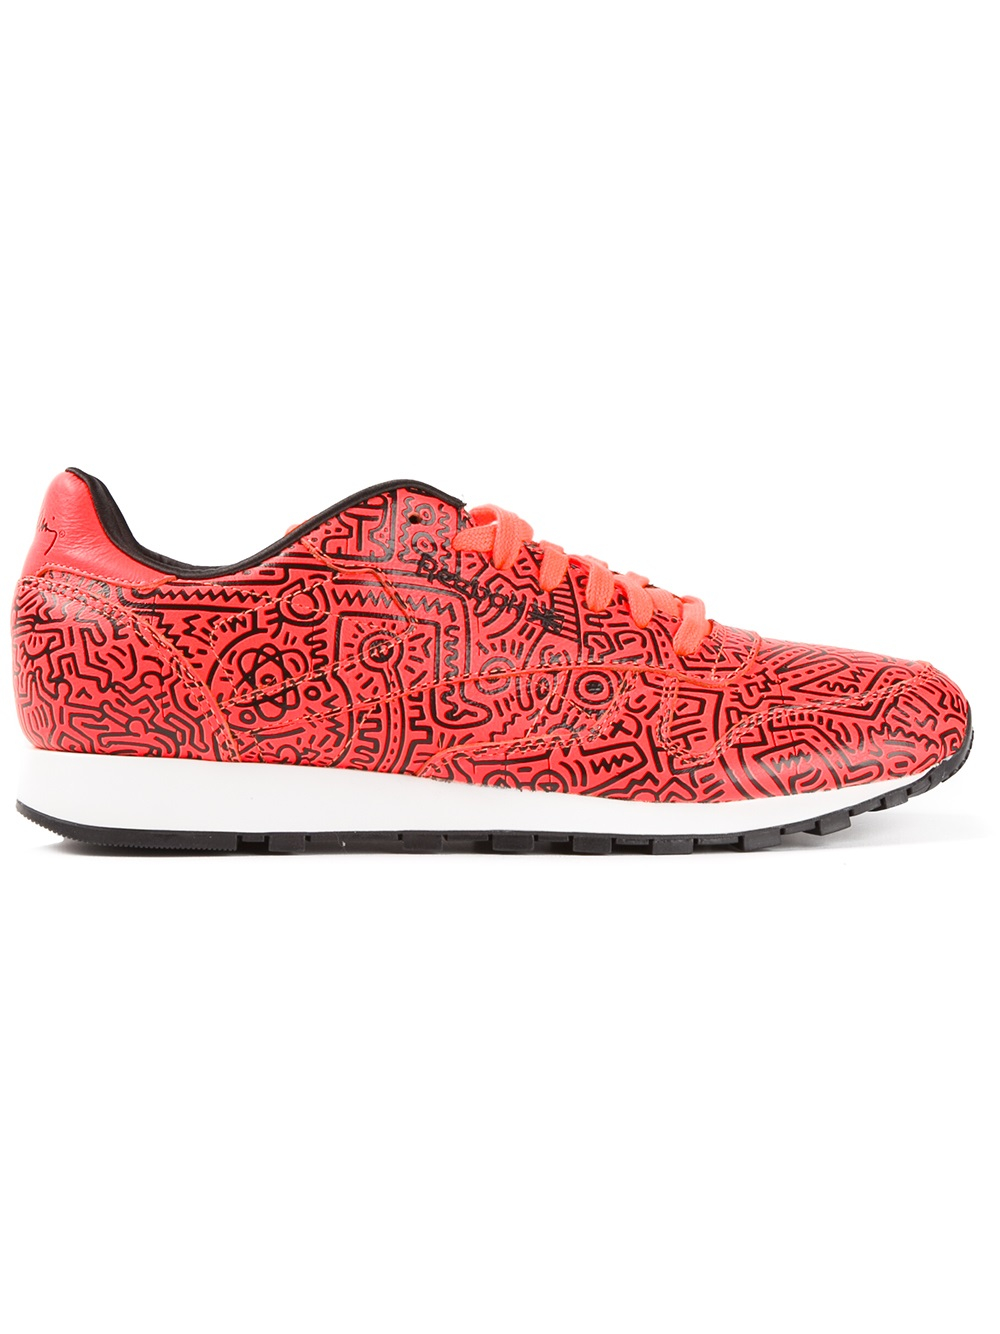 Reebok Keith Haring X Classic Leather Lux Trainers in Yellow & Orange (Red)  for Men | Lyst